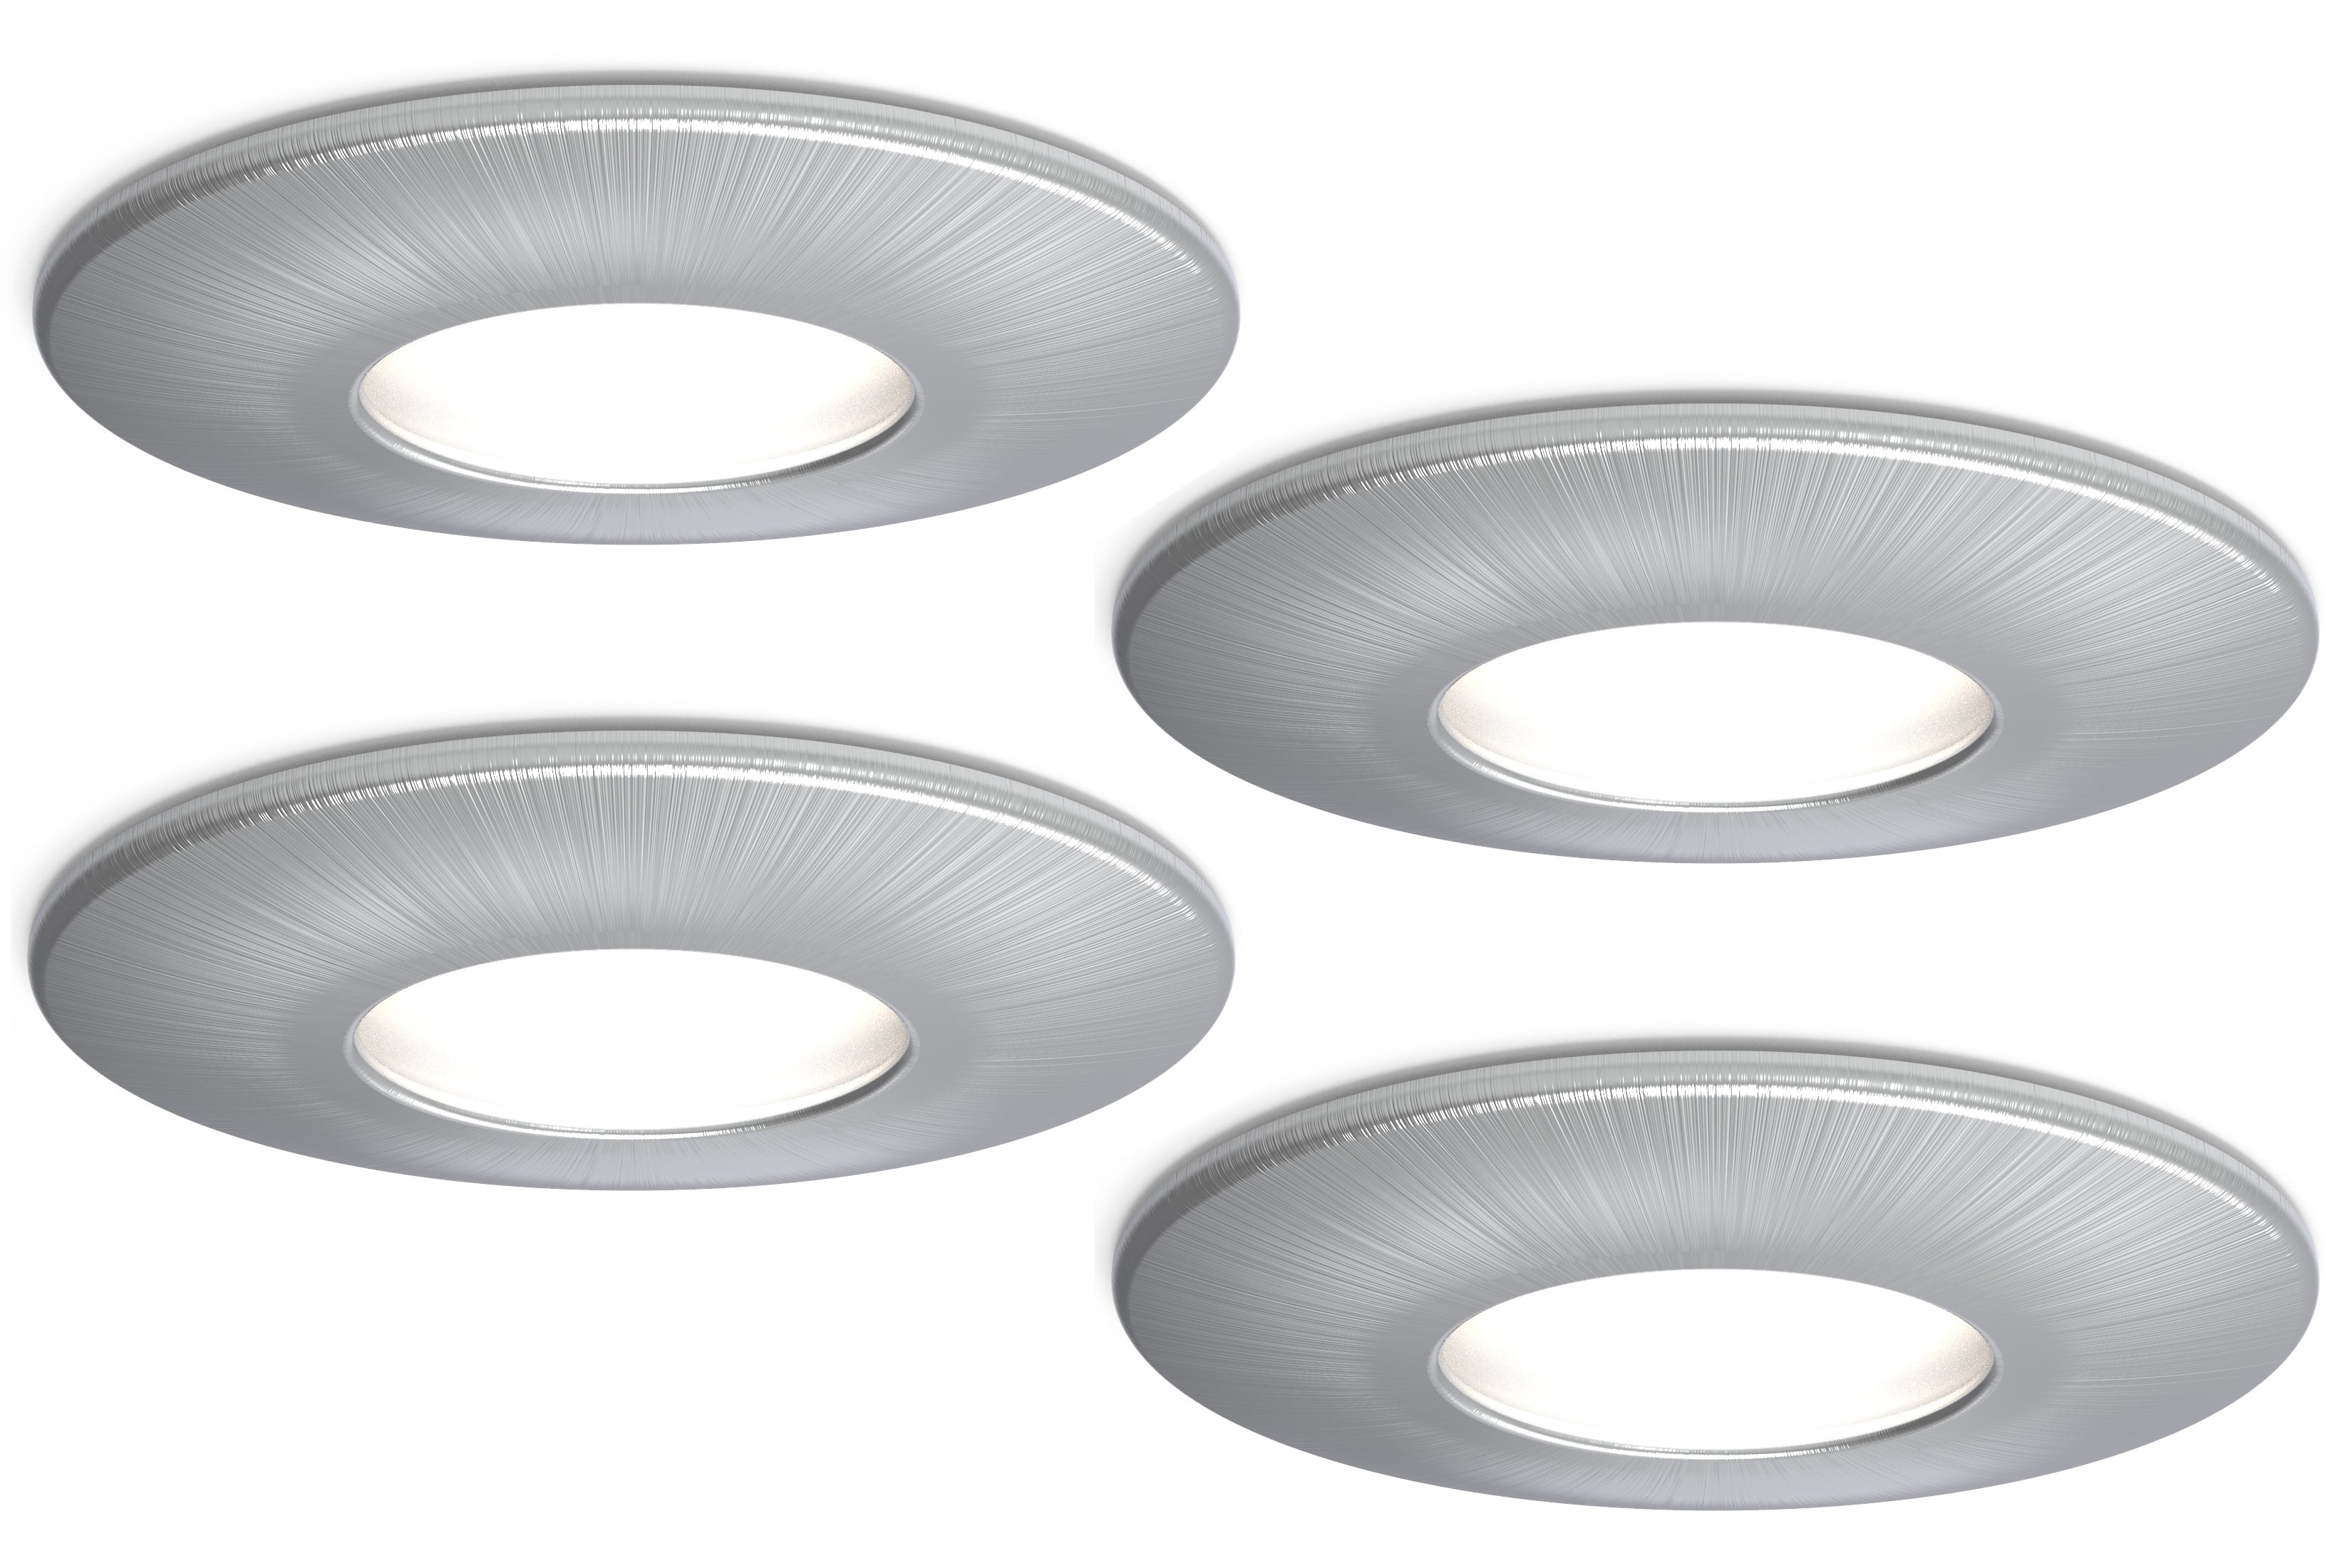 4lite IP65 GU10 Fire-Rated Downlight - Satin Chrome (Pack of 4)